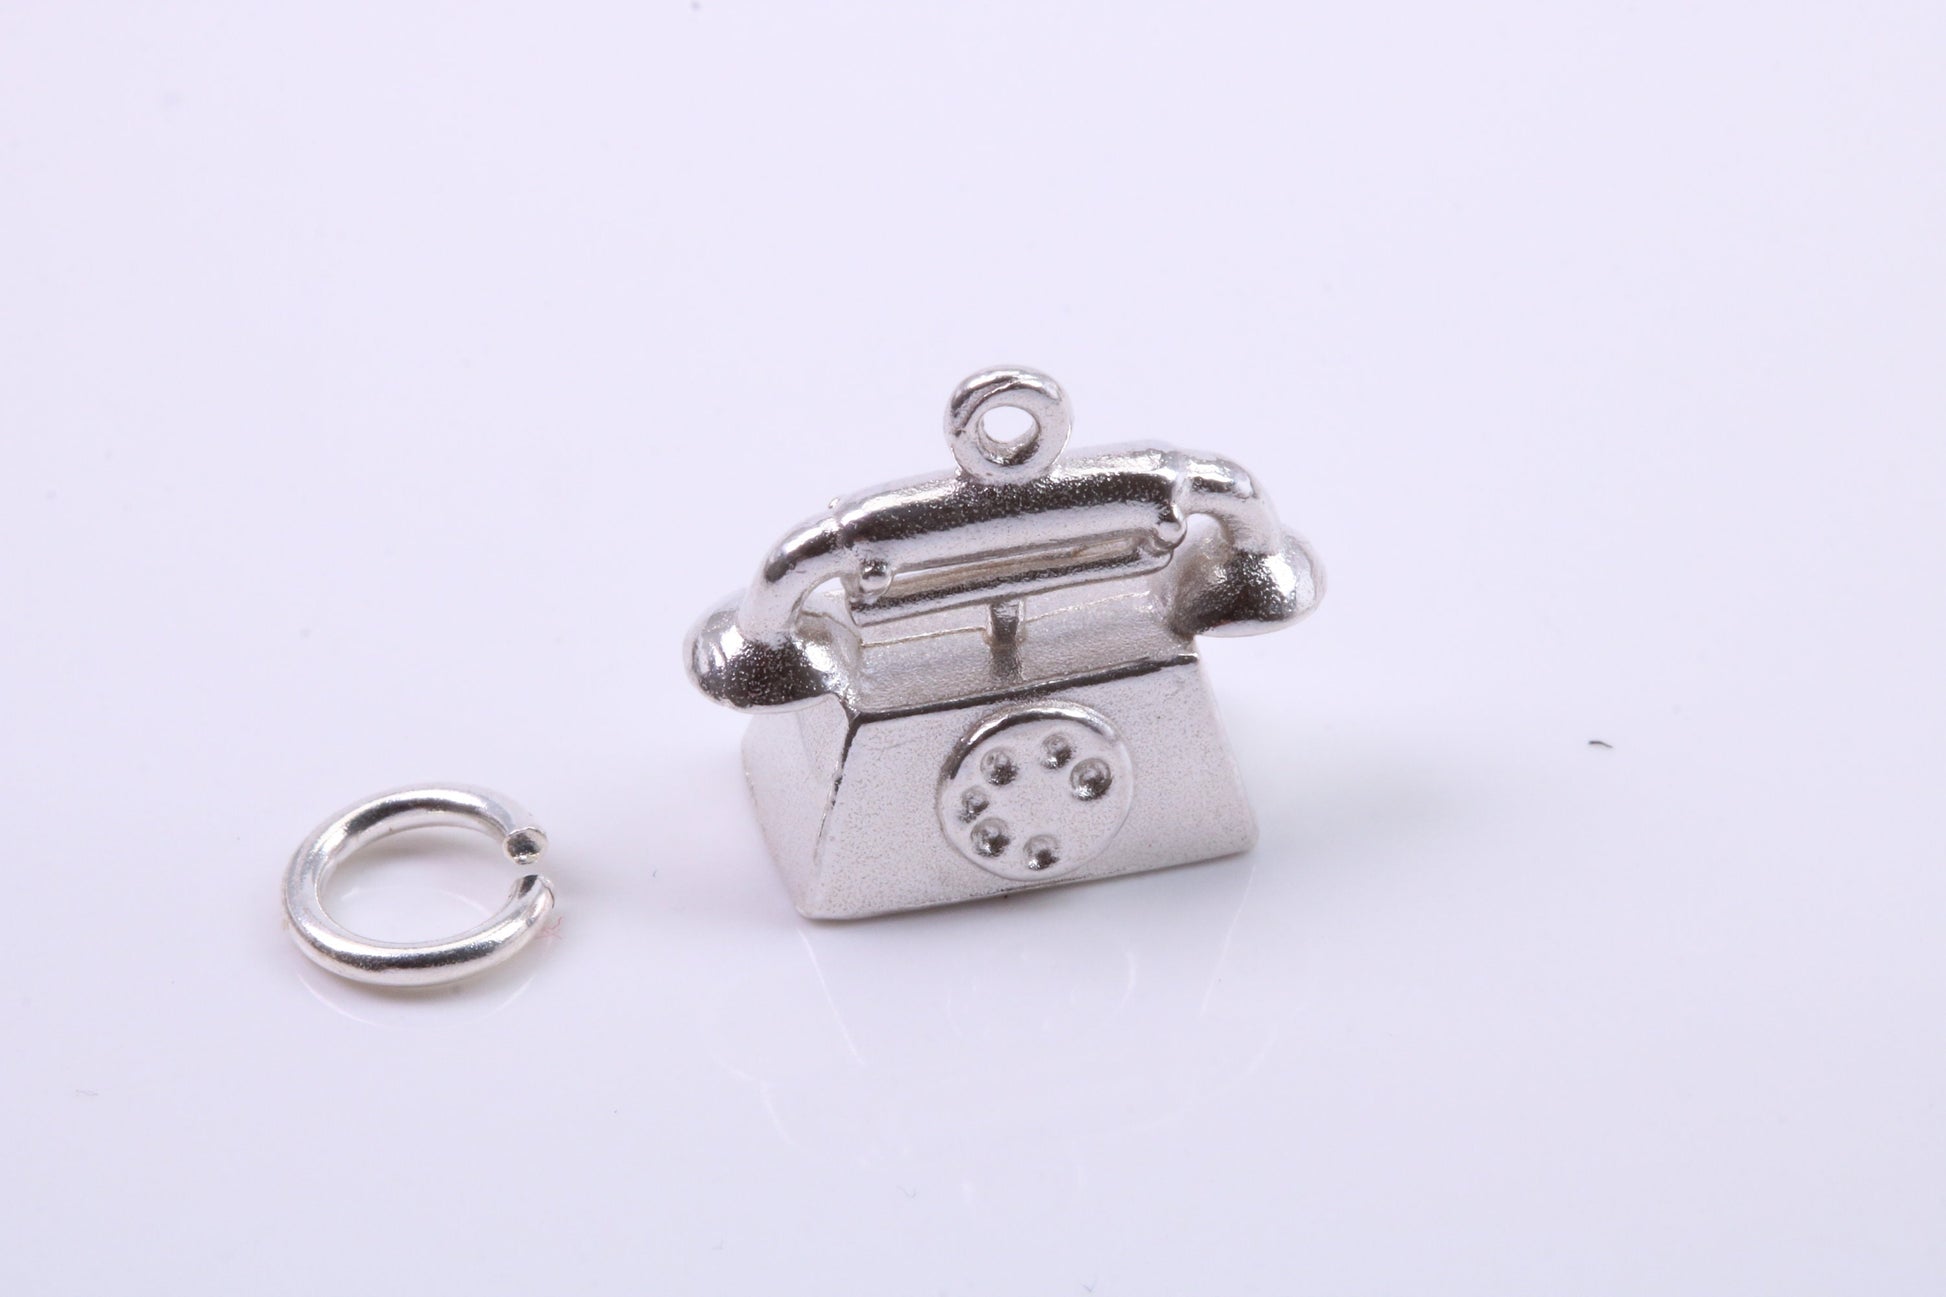 Vintage Phone Charm, Traditional Charm, Made from Solid 925 Grade Sterling Silver, Complete with Attachment Link